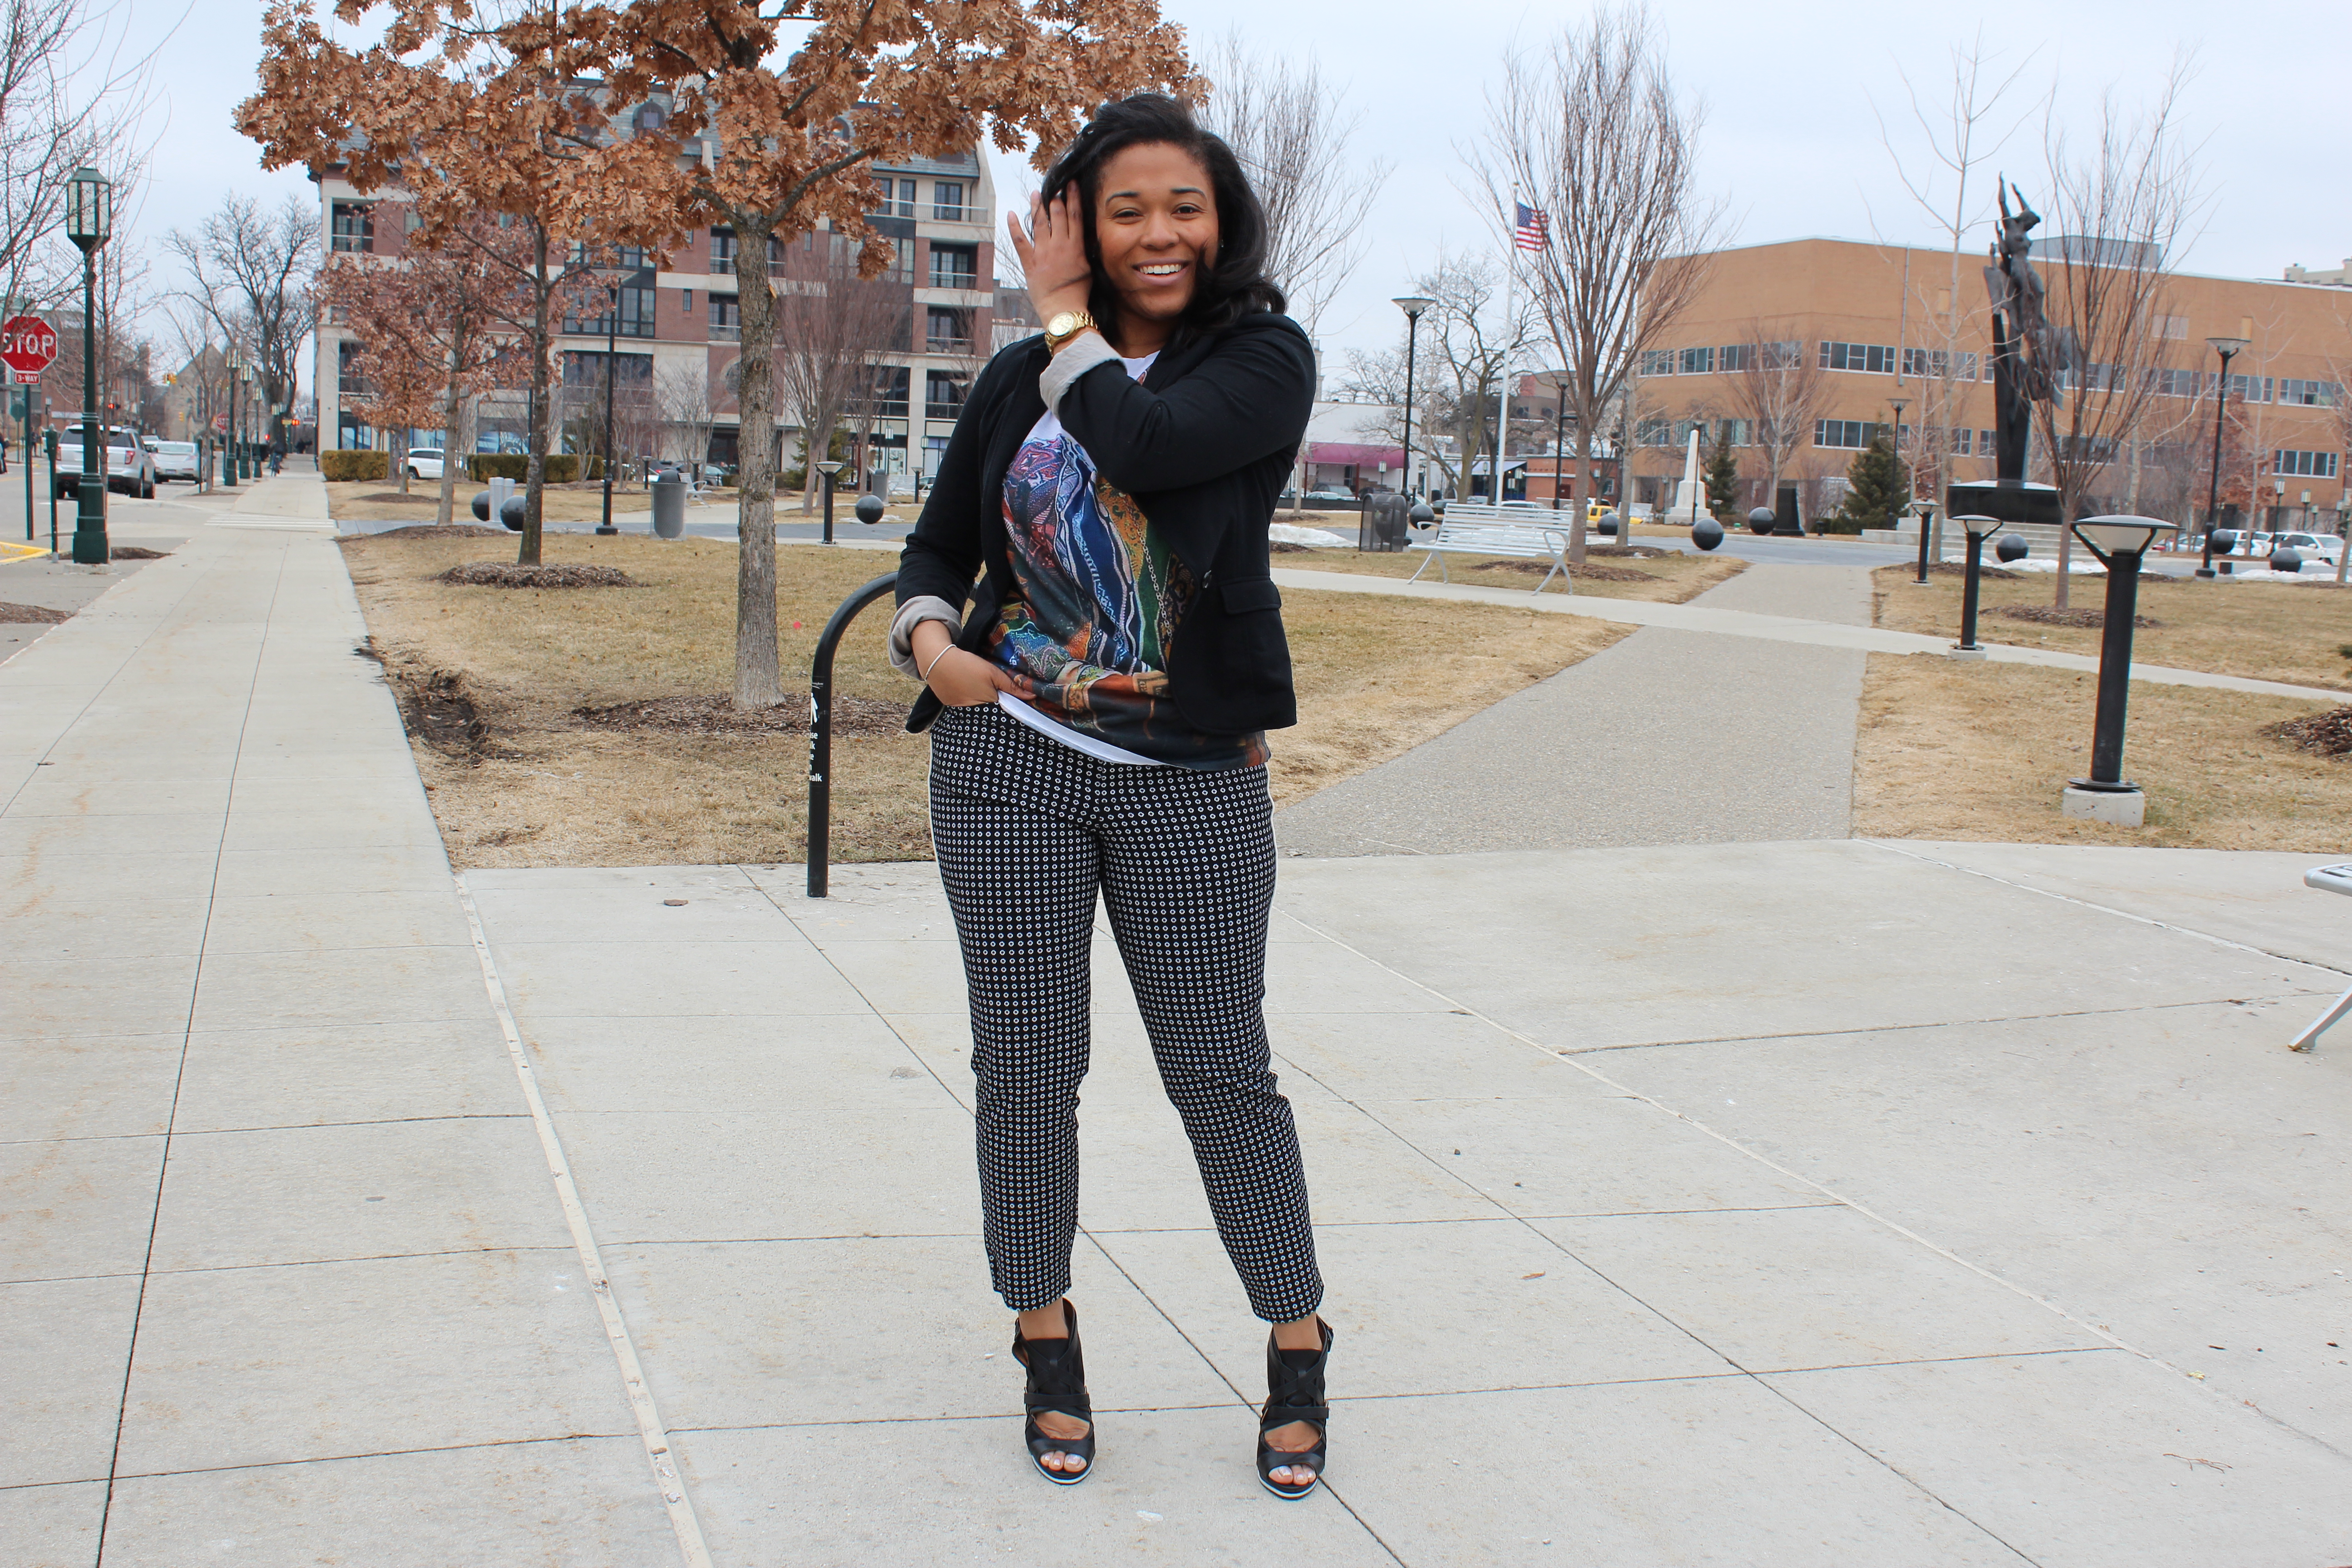 4 Ways To Wear: Old Navy Pixie Pants « Confessions Of A Glam-Aholic